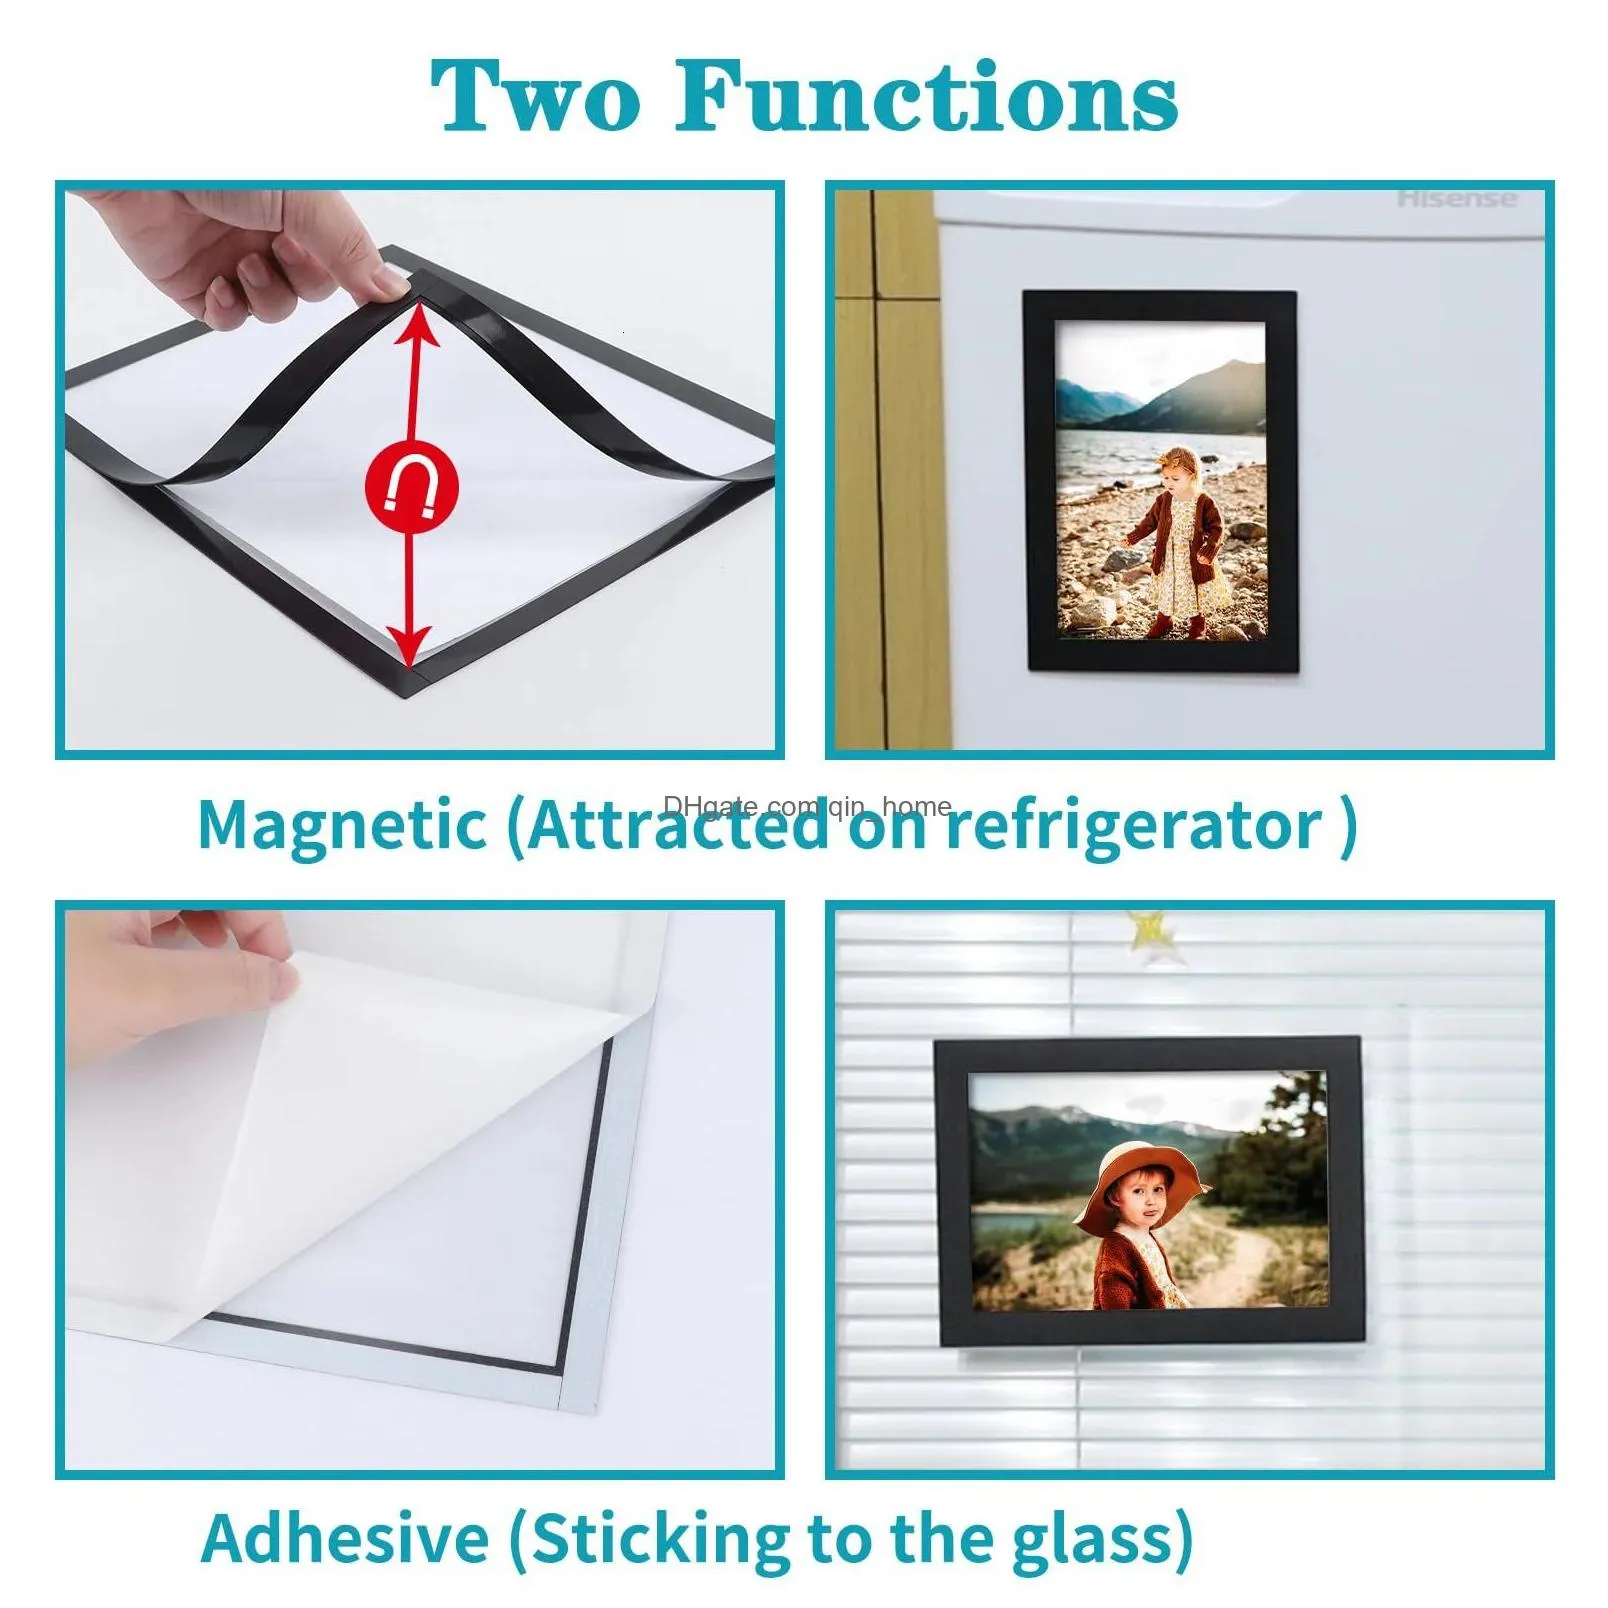 frames 4x6 inch magnetic picture frames magnets po frame rectangle poster painting frame for refrigerator/window/wall home decor